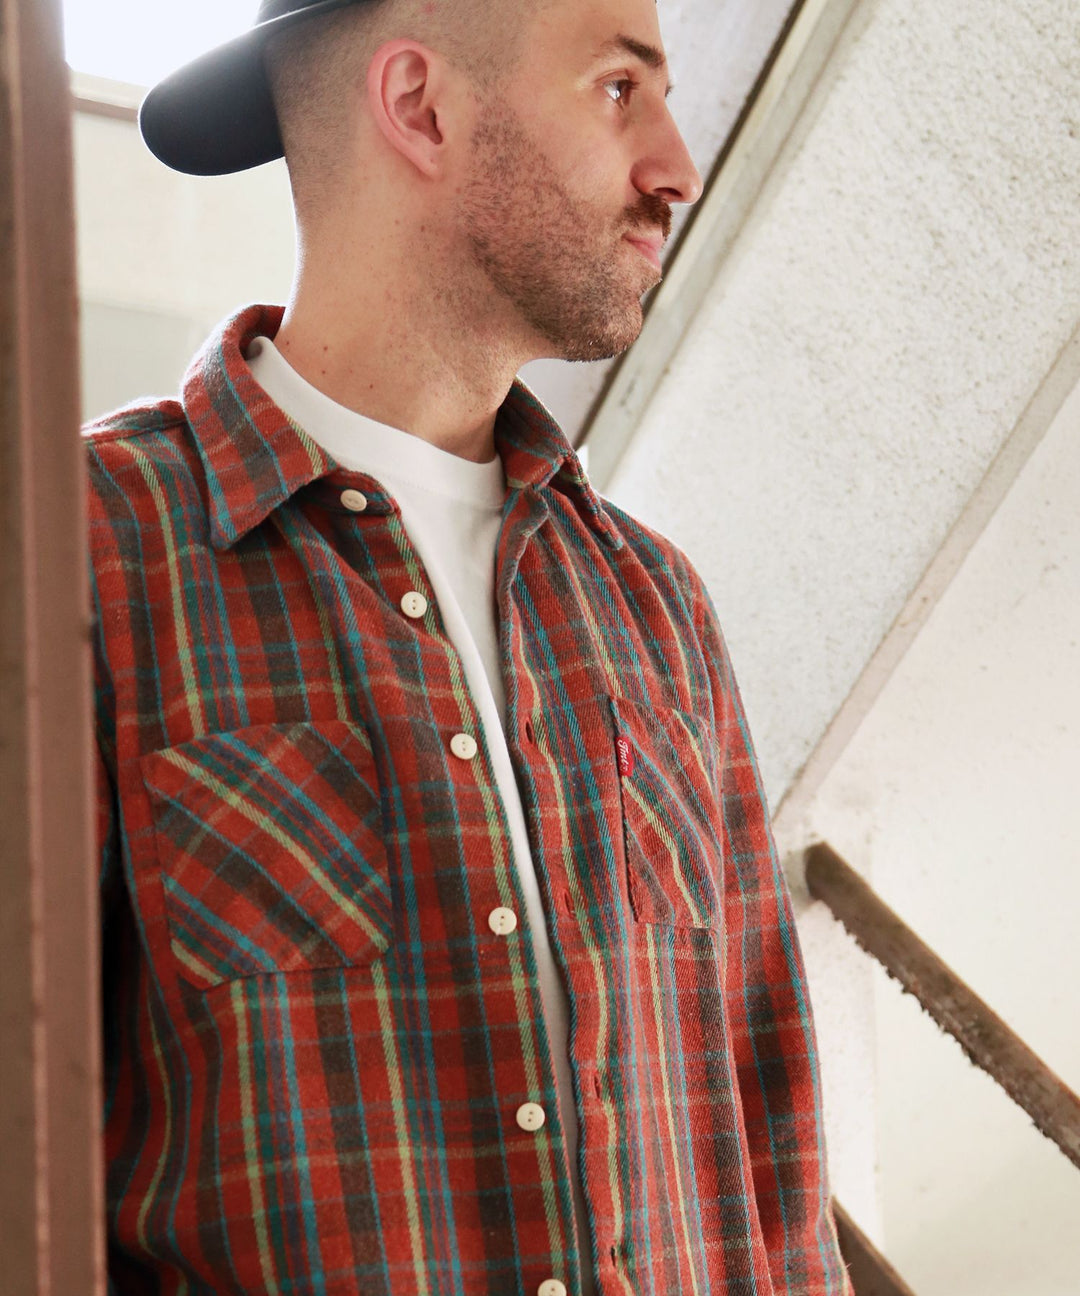 Heavy flannel Check Shirts ／ BROWN